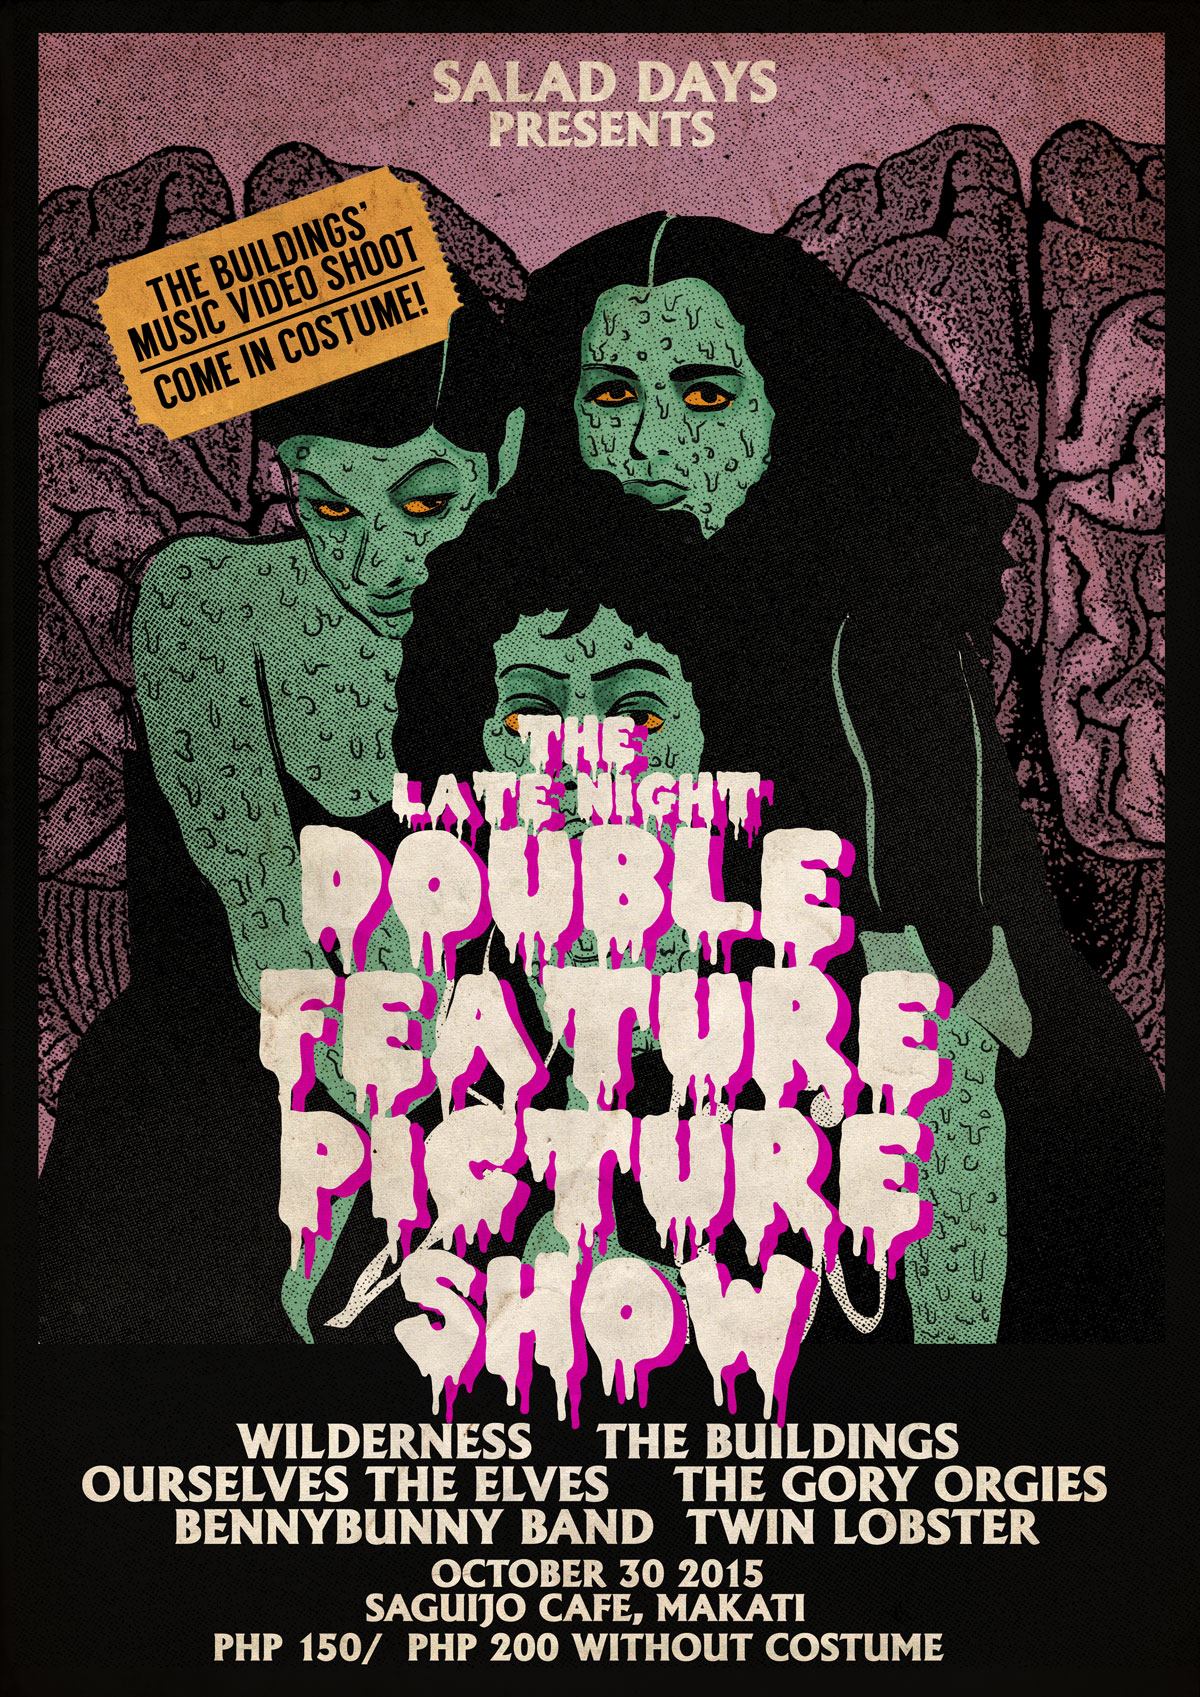 SALAD DAYS PRESENTS: THE LATE NIGHT DOUBLE FEATURE PICTURE SHOW HALLOWEEN PARTY! Friday, October 30 at 9:00pm Next Week · 89°F / 75°F Clear Show Map saGuijo Cafe + Bar Events 7612 Guijo Street, San Antonio Village, 1203 Makati, Philippines Janet! Dr. Scott! Janet! Brad! Rocky! Janet! Dr. Scott! Janet! Brad! Rocky! Janet! Dr. Scott! Janet! Brad! Rocky! Janet! Dr. Scott! Janet! Brad! Rocky! Janet! Dr. Scott! Janet! Brad! Rocky! Oh, do you wanna go? To THE LATE NIGHT DOUBLE FEATURE PICTURE SHOW Presented by Salad Days featurning Wilderness Twin Lobster Ourselves the Elves The Gory Orgies The Buildings BennyBunnyBand P150 with costume P200 without costume 9pm SEE YA THERE!!! Poster by Jonah Garcia --- The Buildings will also be shooting a music video and you can be part of it if you want to! More details soon.